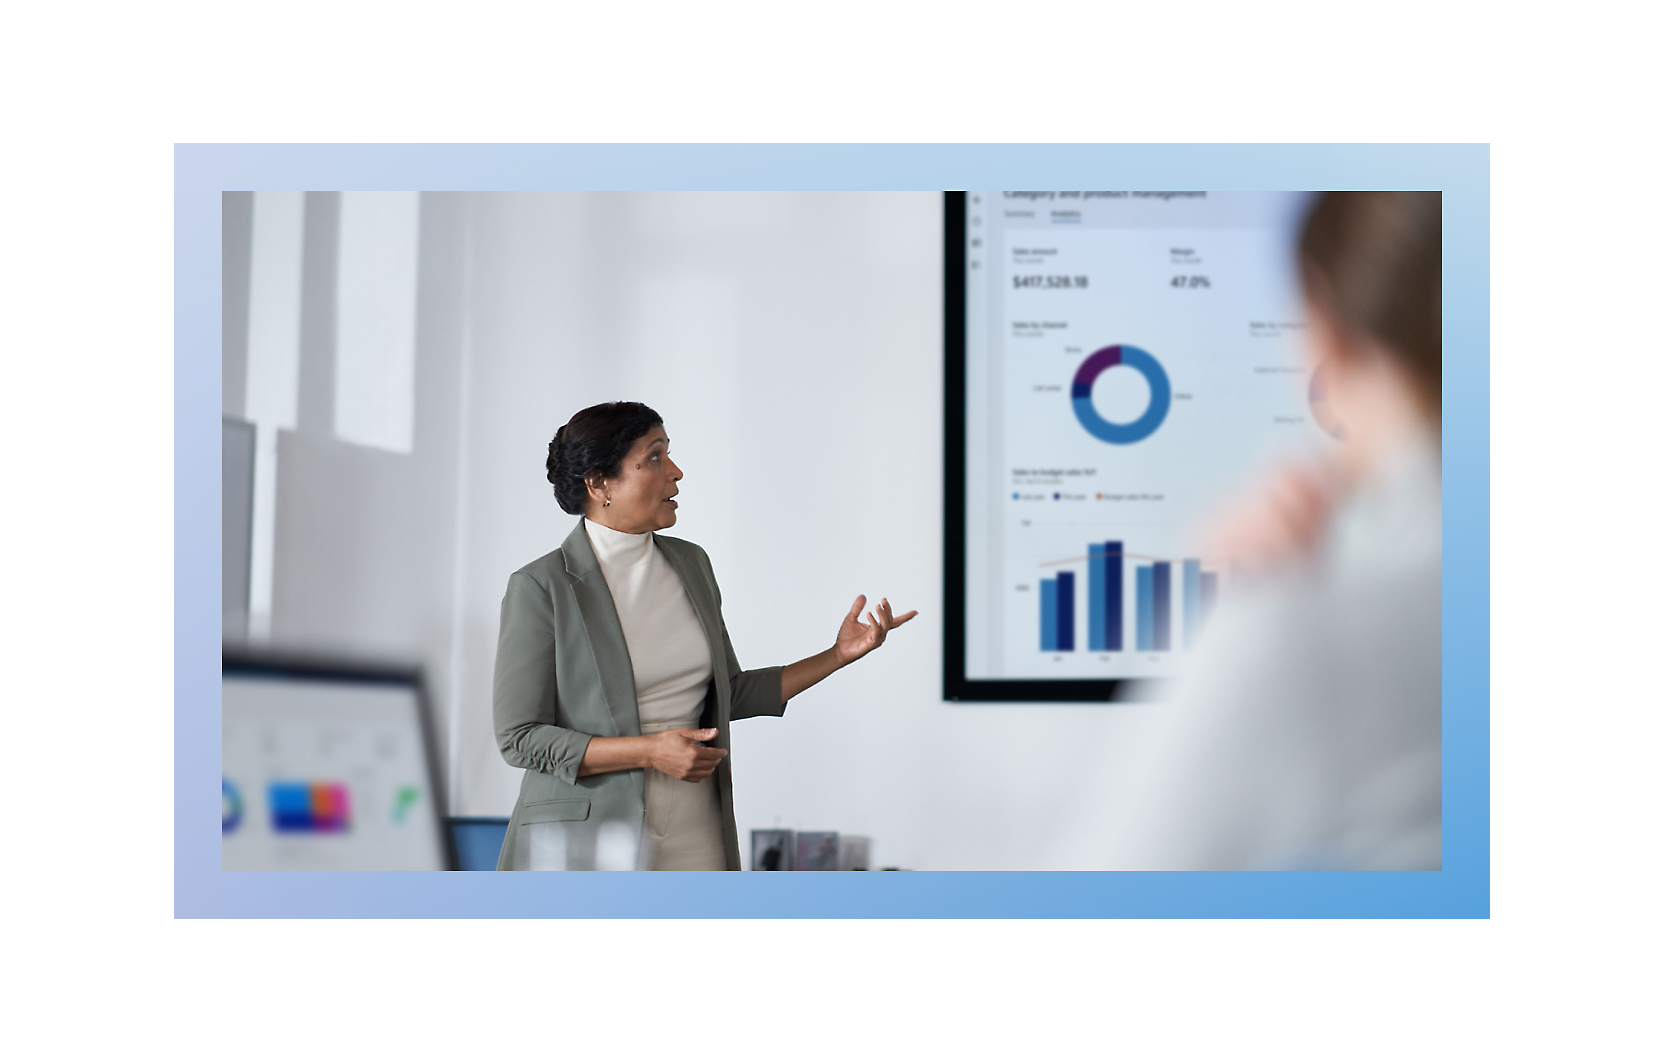 A screen shot of woman presenting graph in meeting